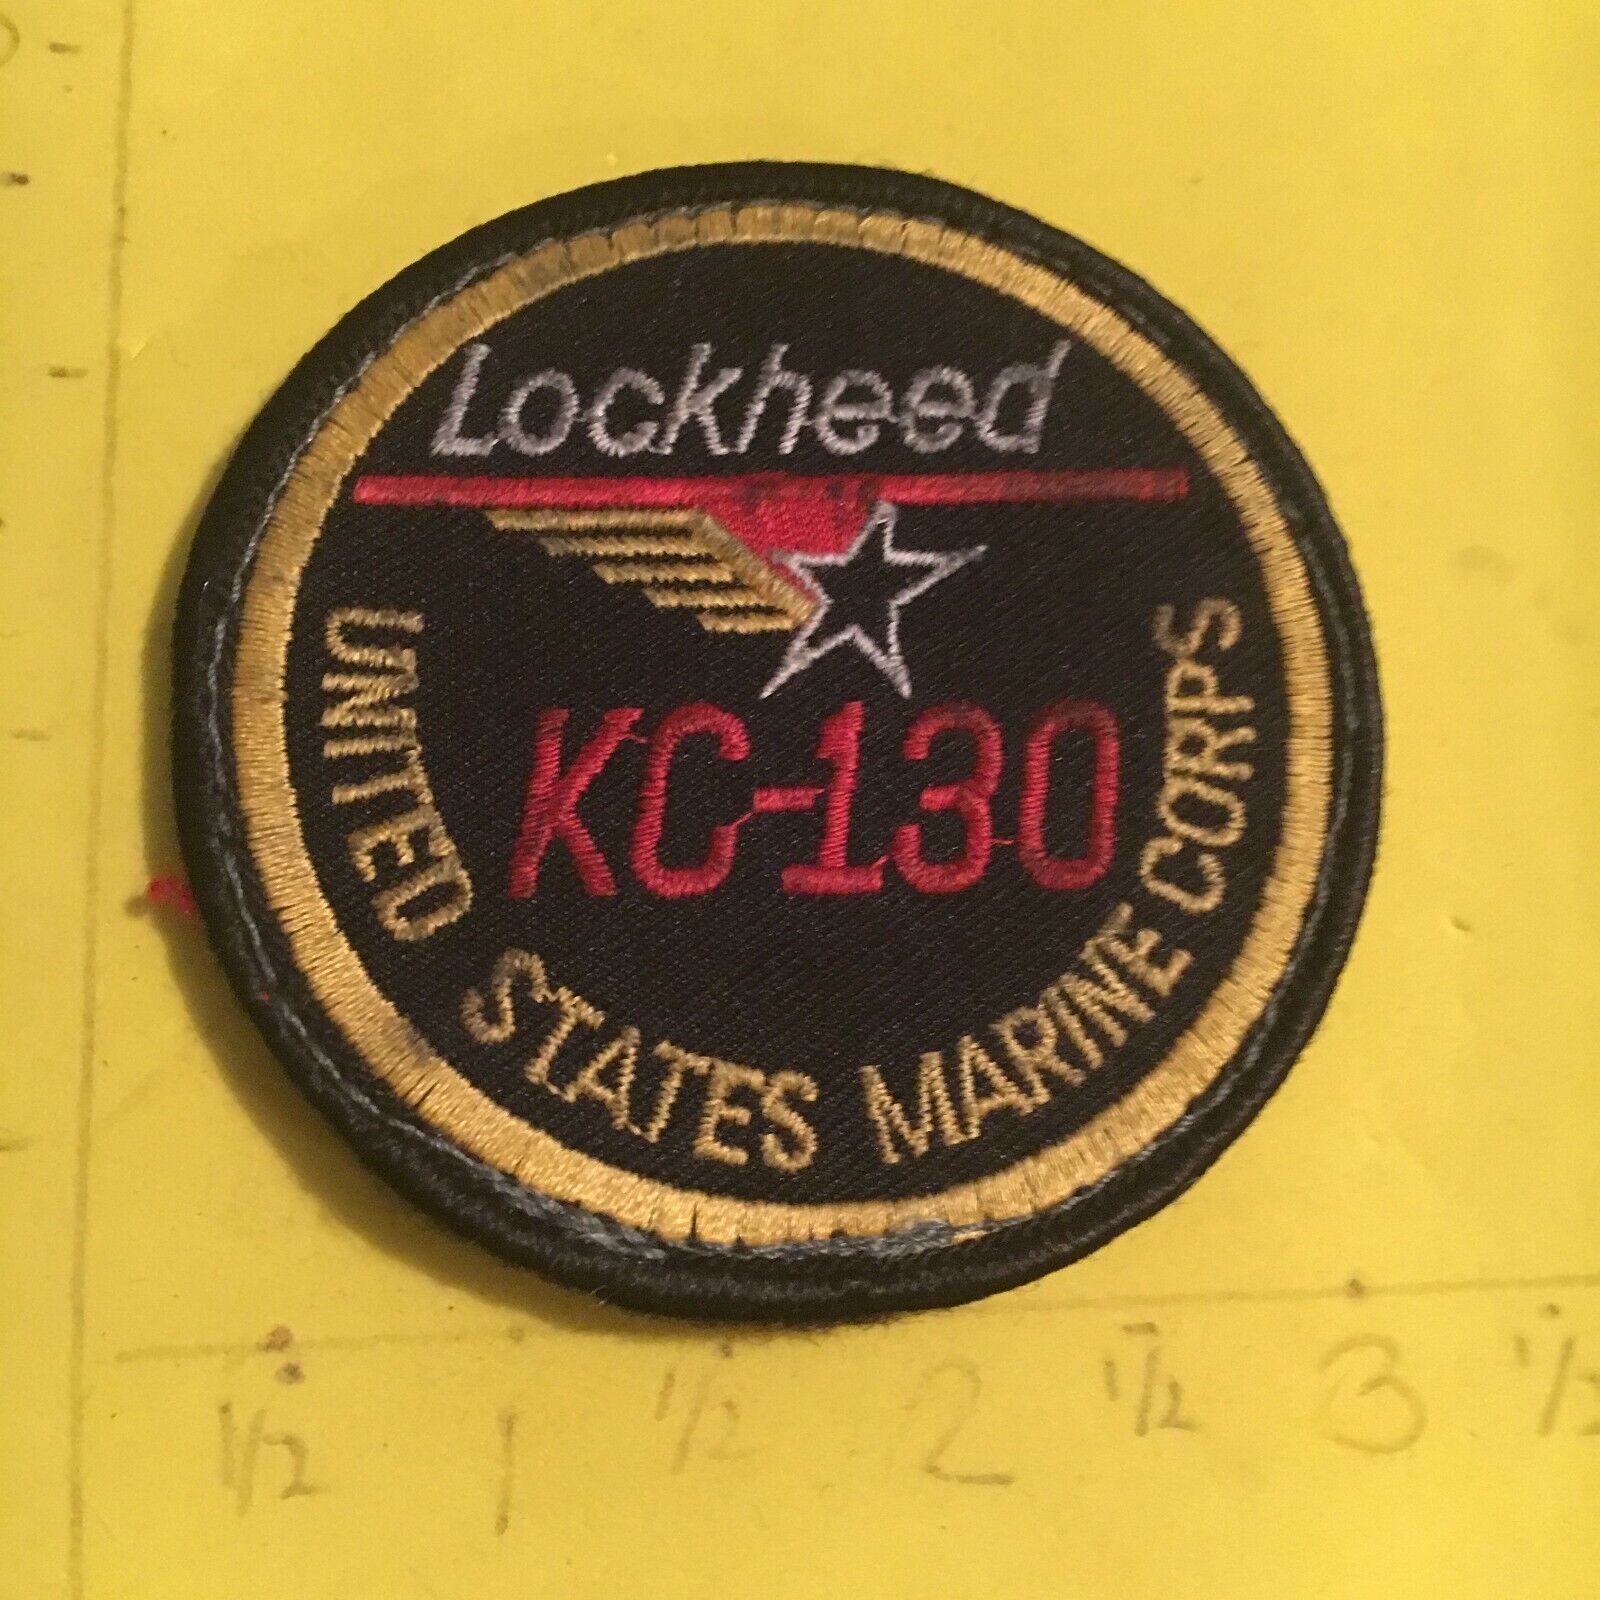 USMC Lockheed KC-130 SQUADRON Patch 9/25 with hook & loop back